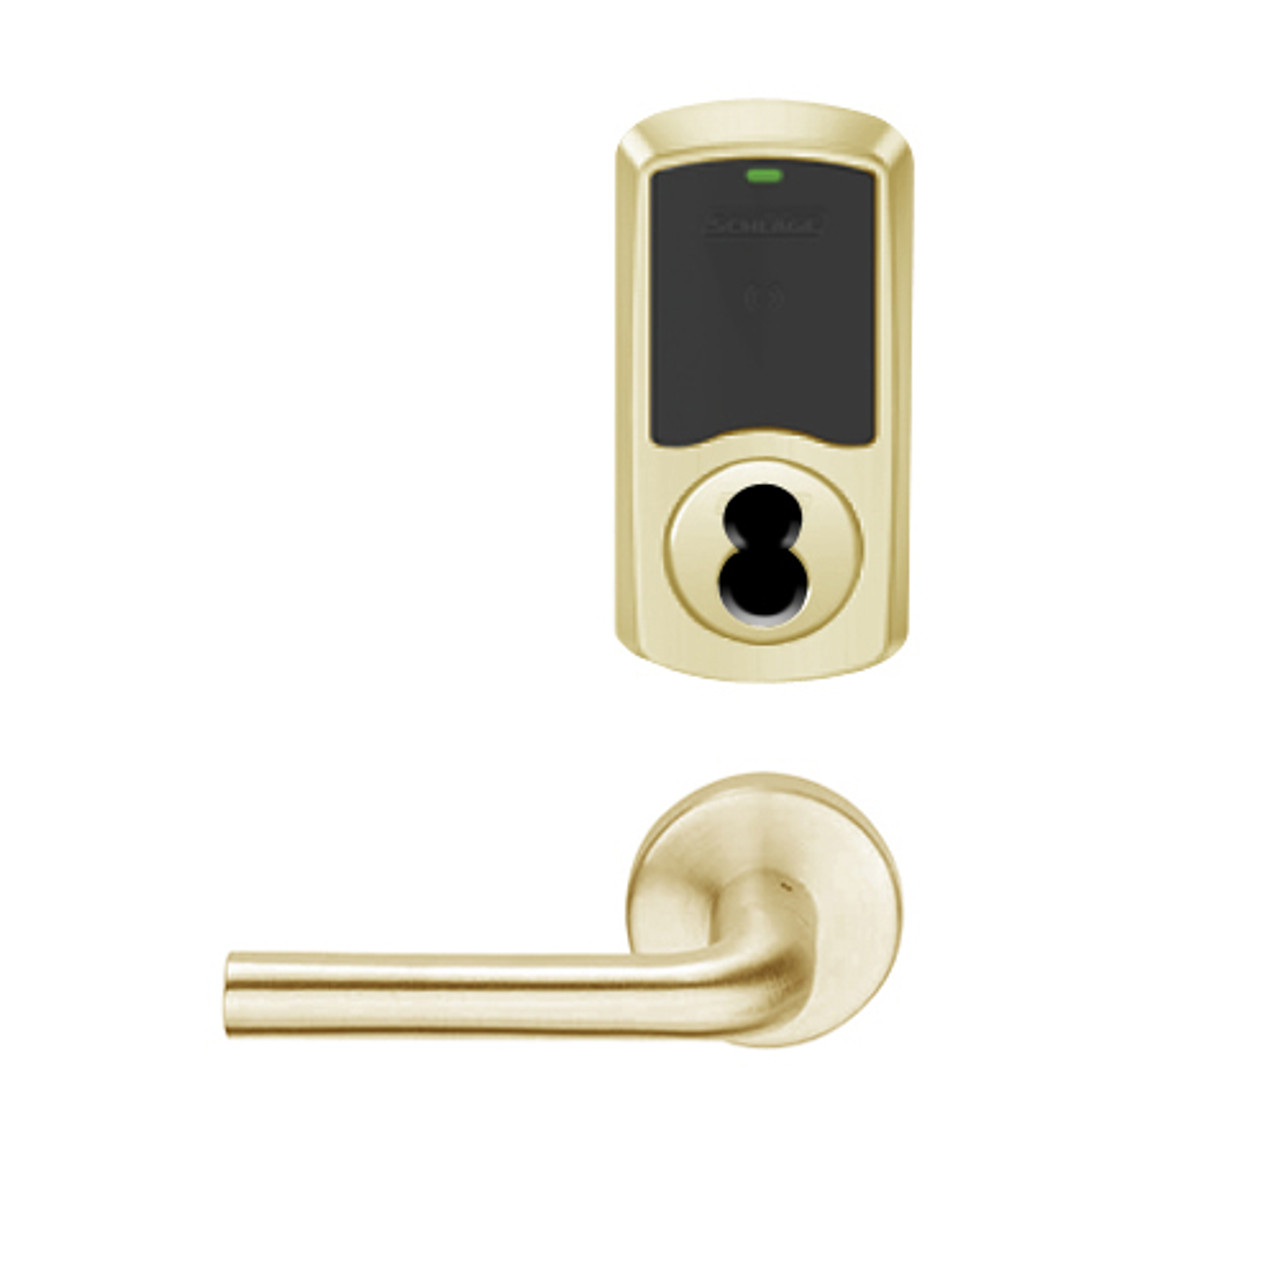 LEMB-GRW-BD-02-606-00B Schlage Privacy/Office Wireless Greenwich Mortise Lock with Push Button & LED Indicator and 02 Lever Prepped for SFIC in Satin Brass